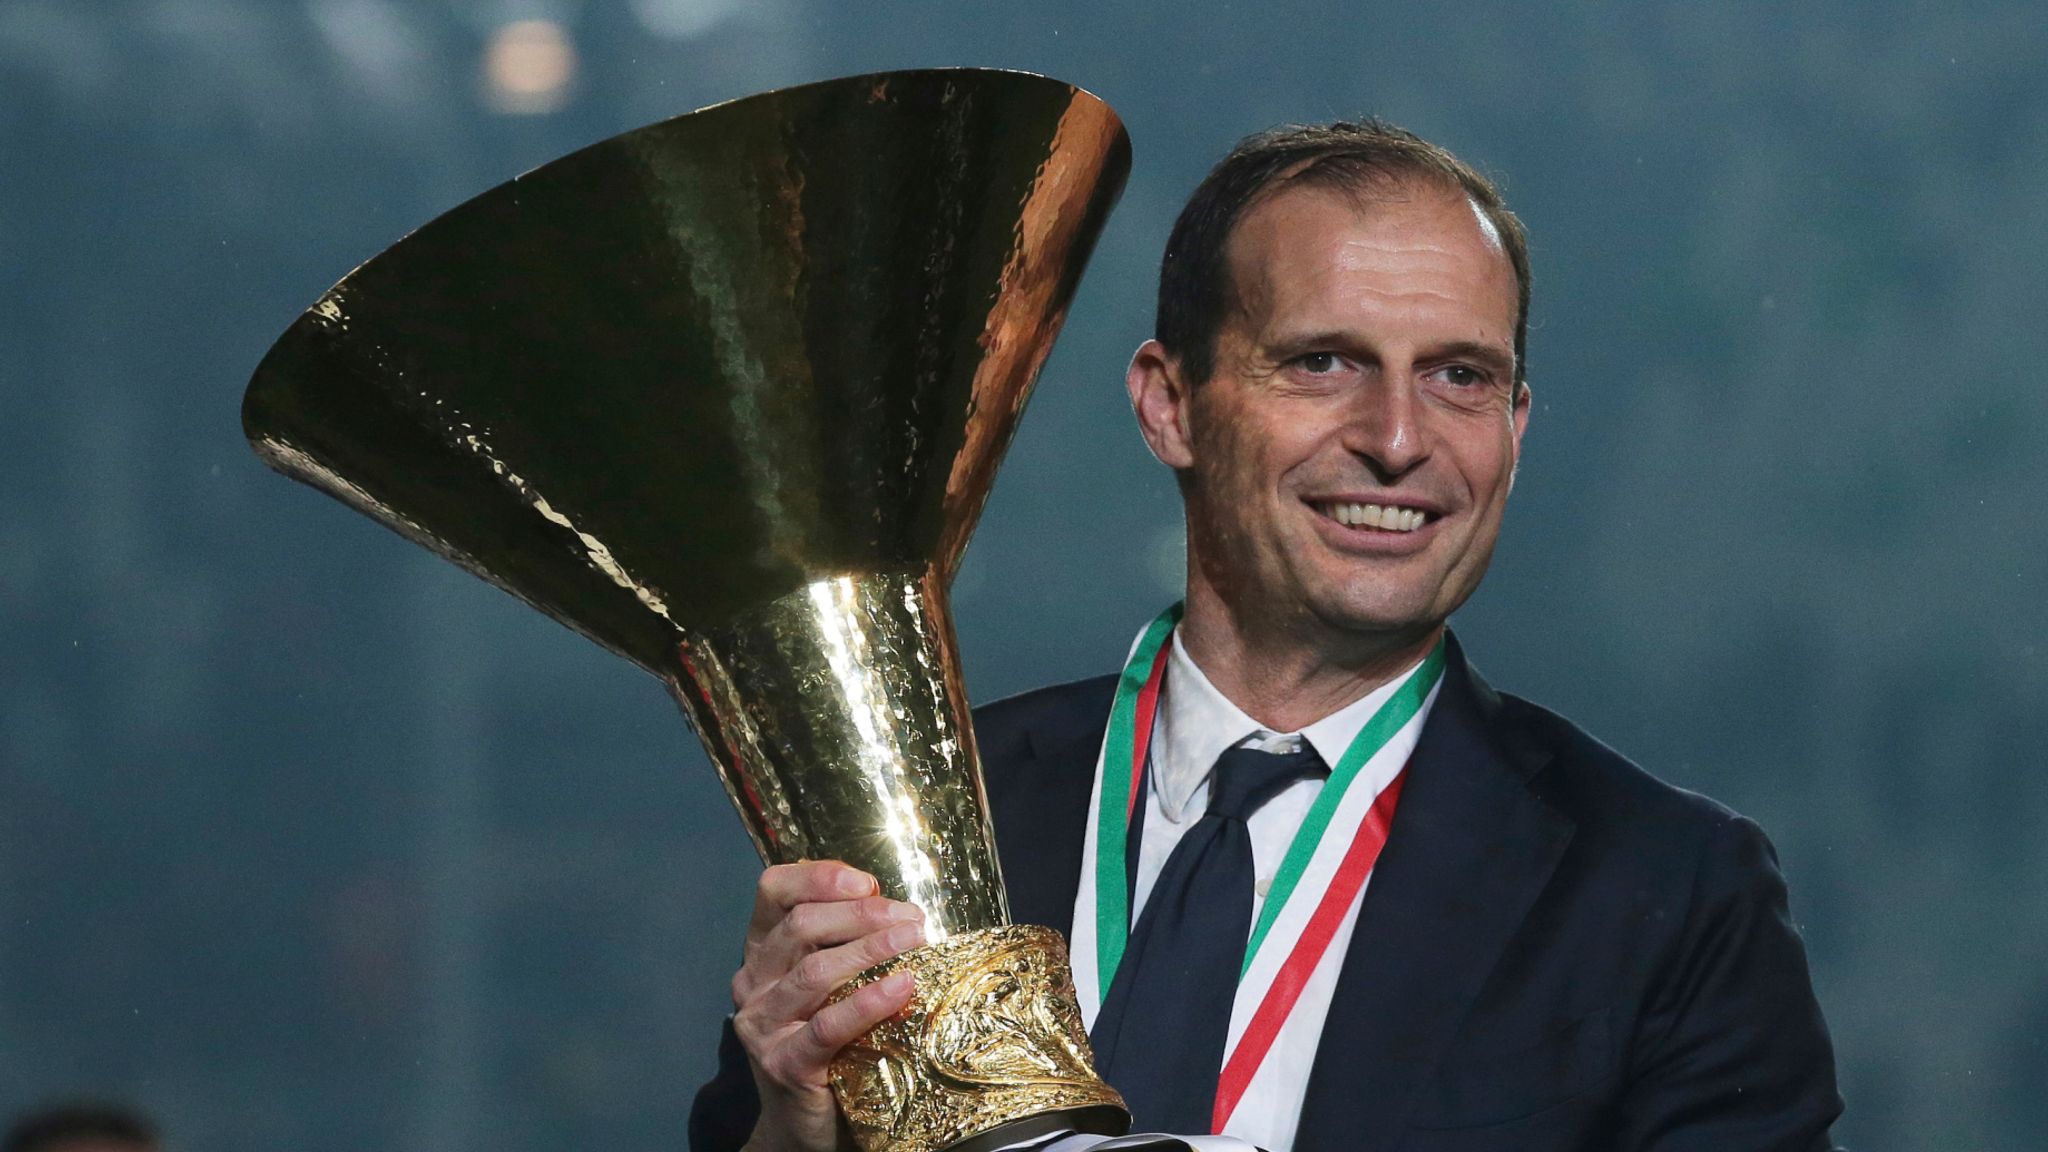 Juventus: Massimiliano Allegri to replace Andrea Pirlo in return to the club as manager